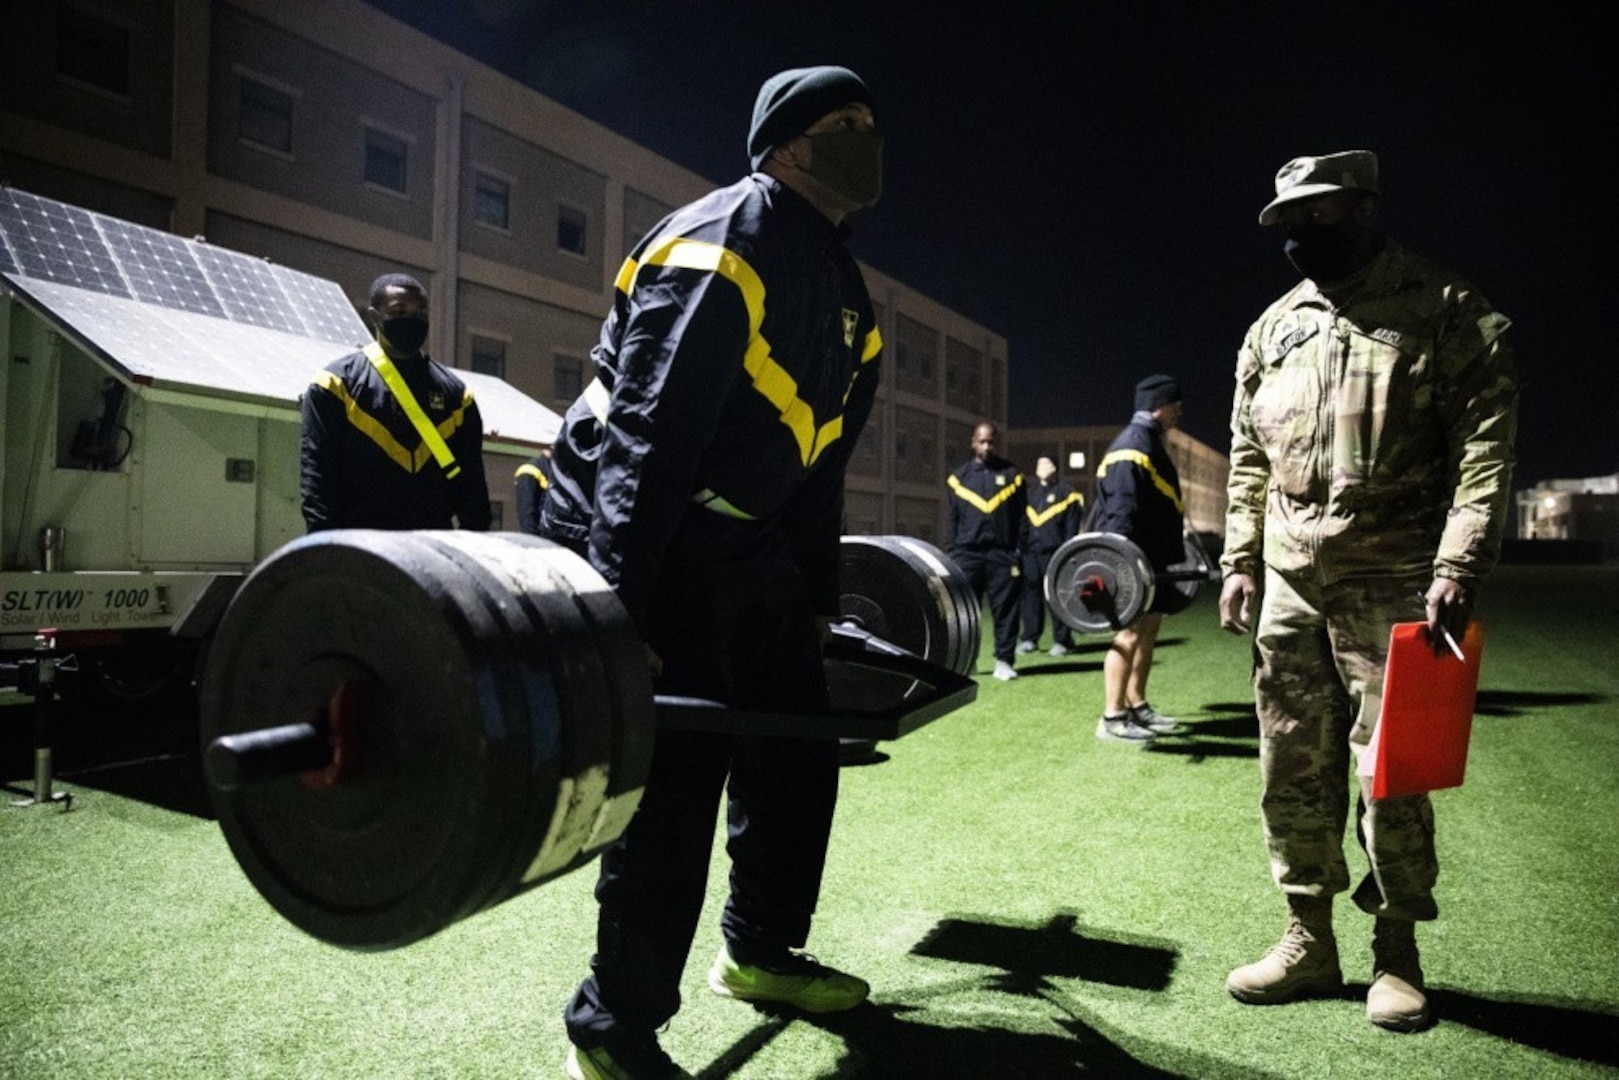 Maj. Mark Douglass, assigned to U.S. Army Central Forward at Camp Arifjan, Kuwait, deadlifts 340 pounds for maximum points in the event during an Army Combat Fitness Test Jan. 25, 2021.